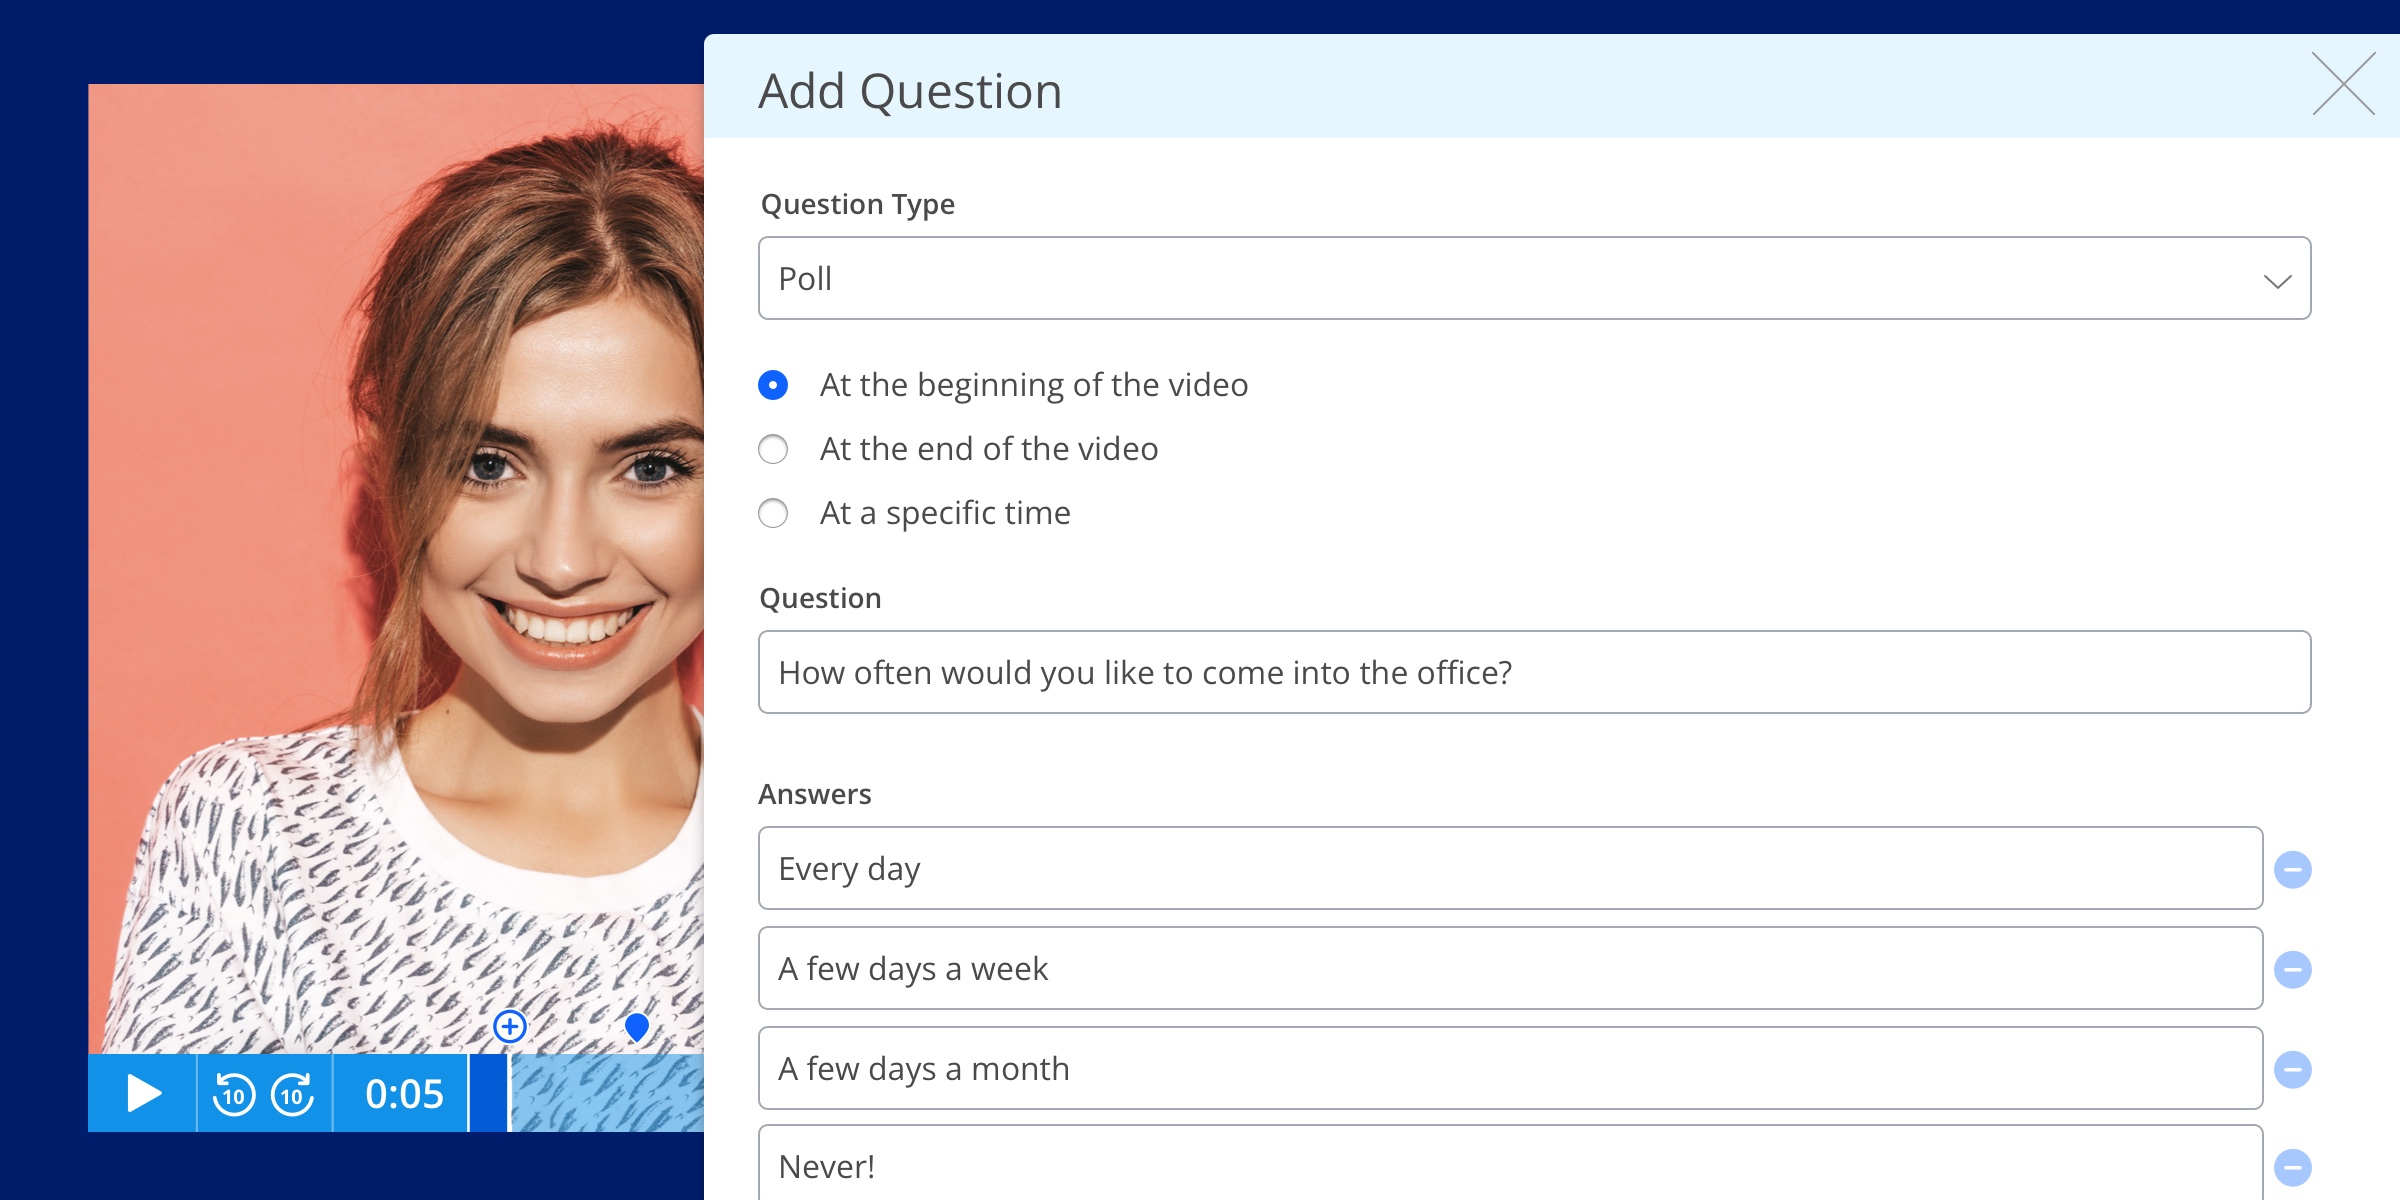 Businesses can use interactive video quizzes, surveys, and polls to build team culture, onboard and train employees, and assess employee engagement.